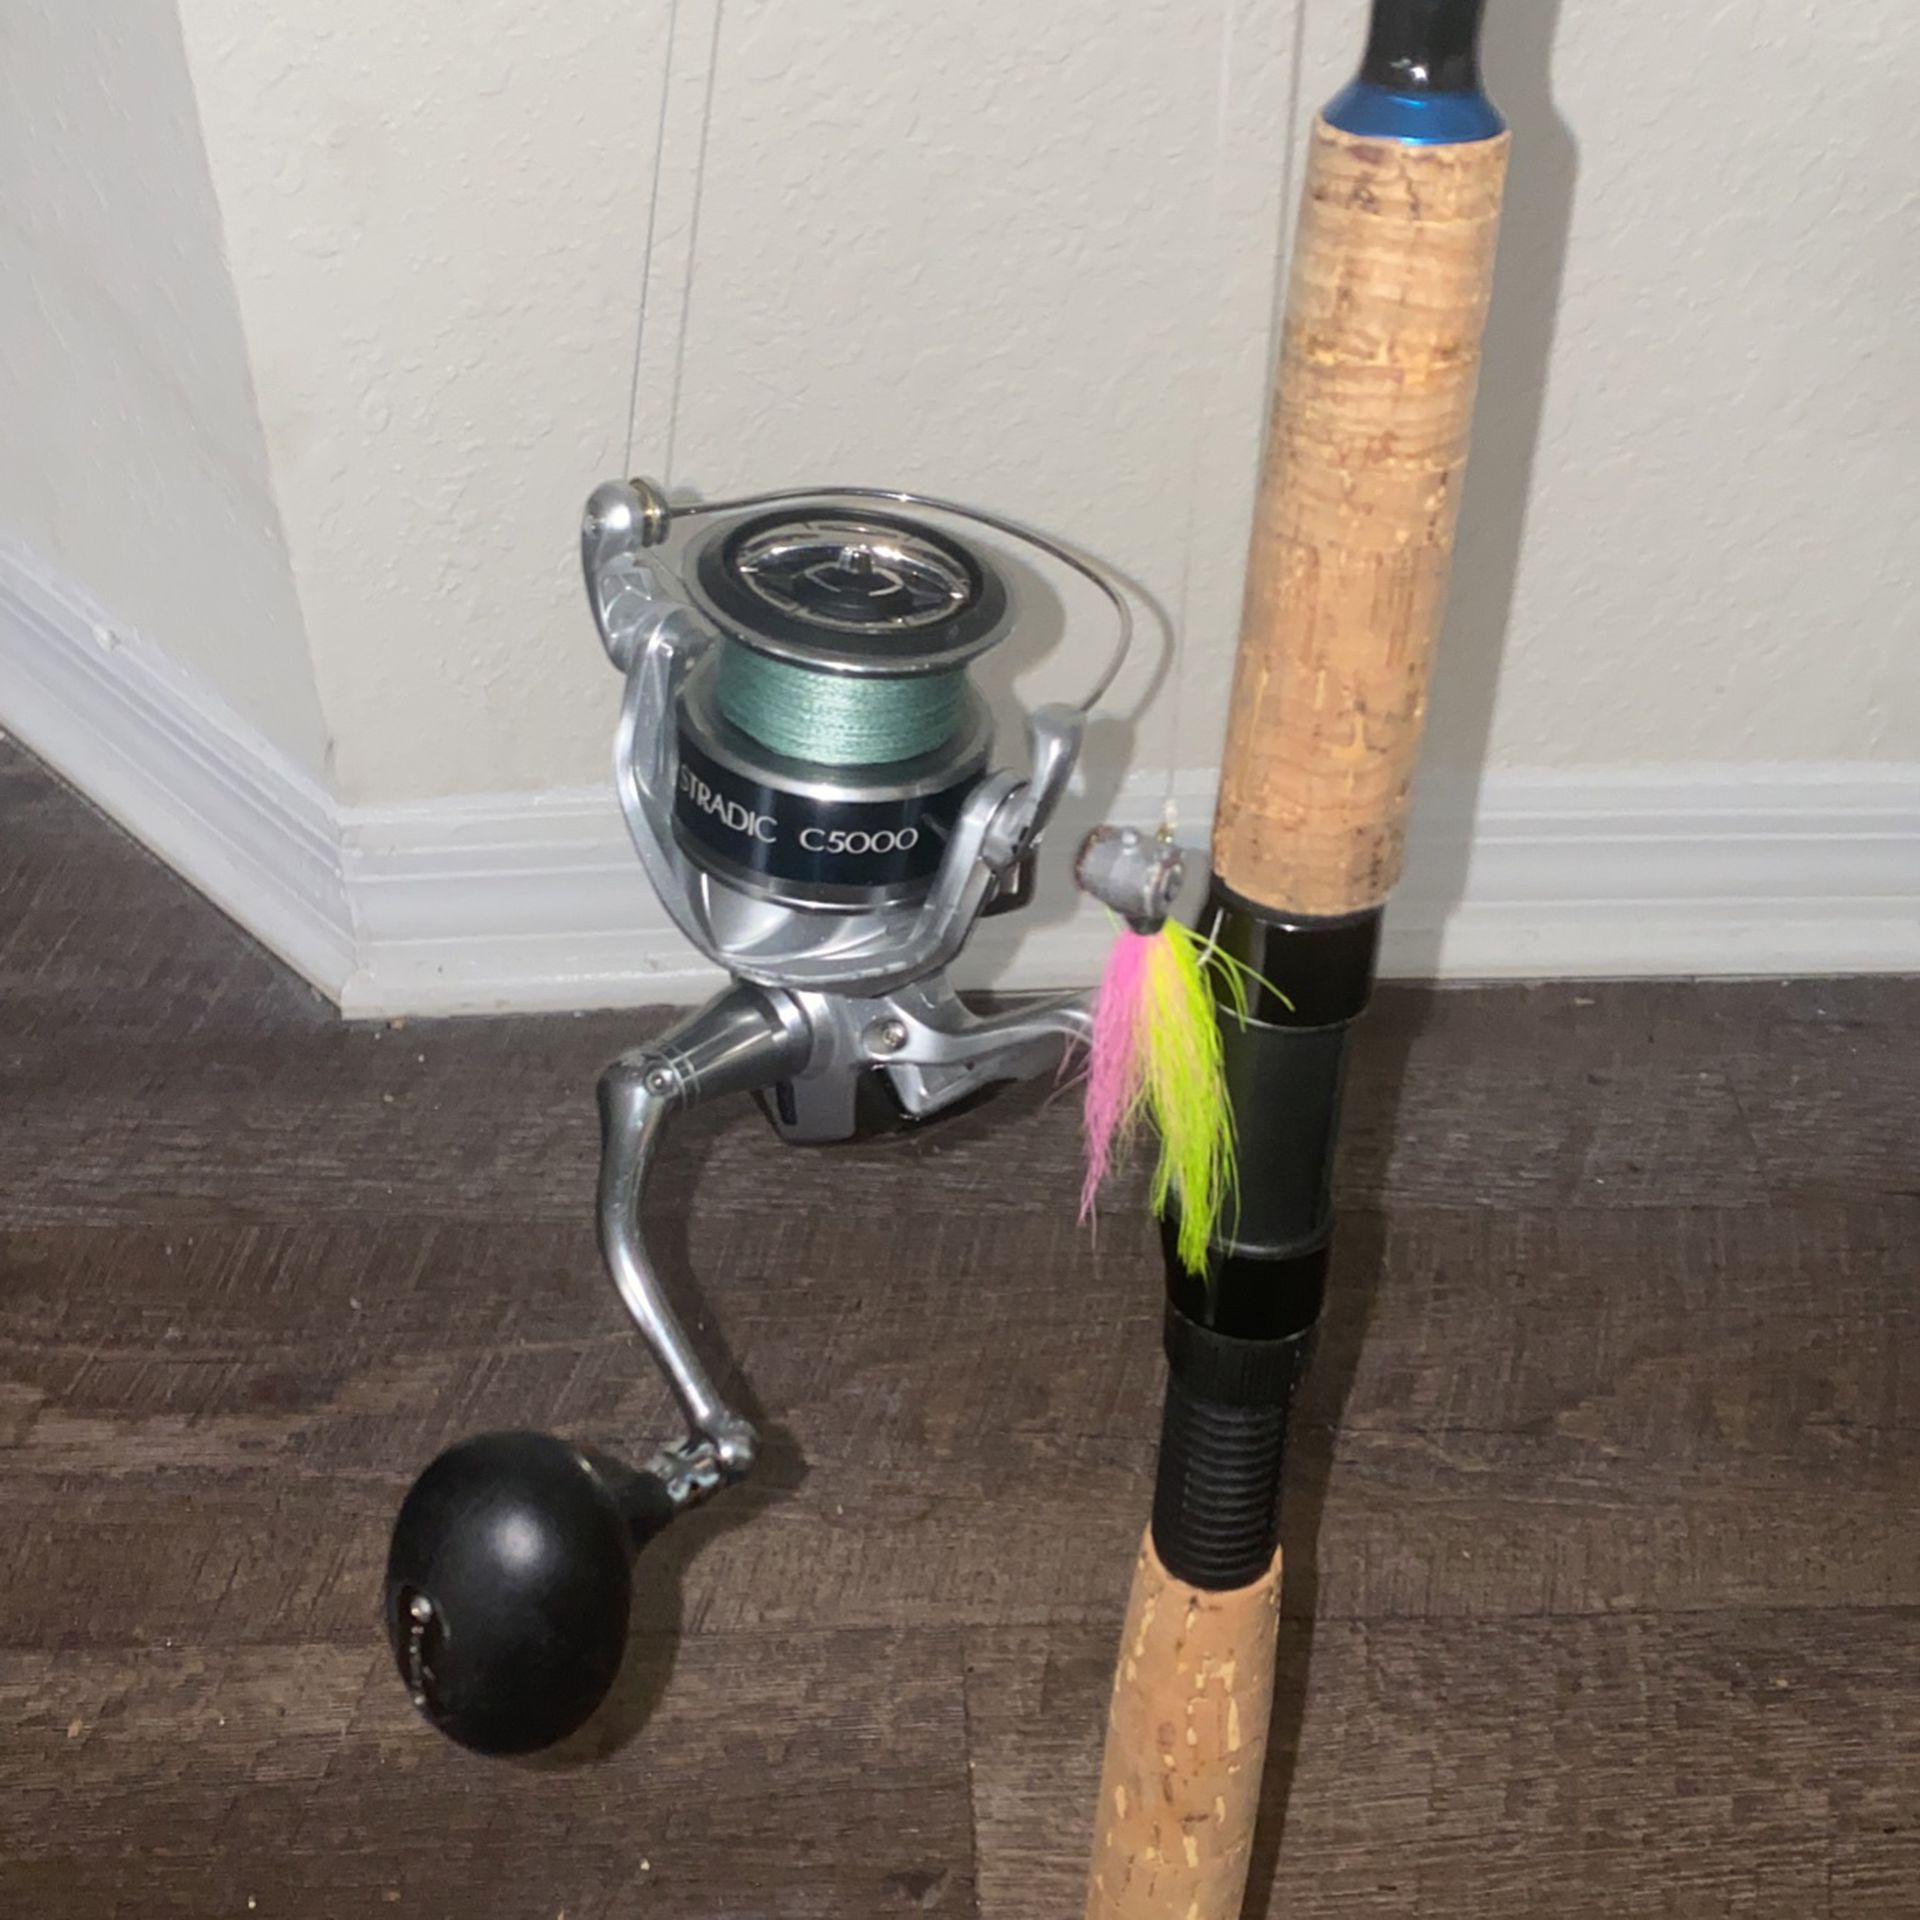 Shimano Stradic 5000 Combo for Sale in West Palm Beach, FL - OfferUp